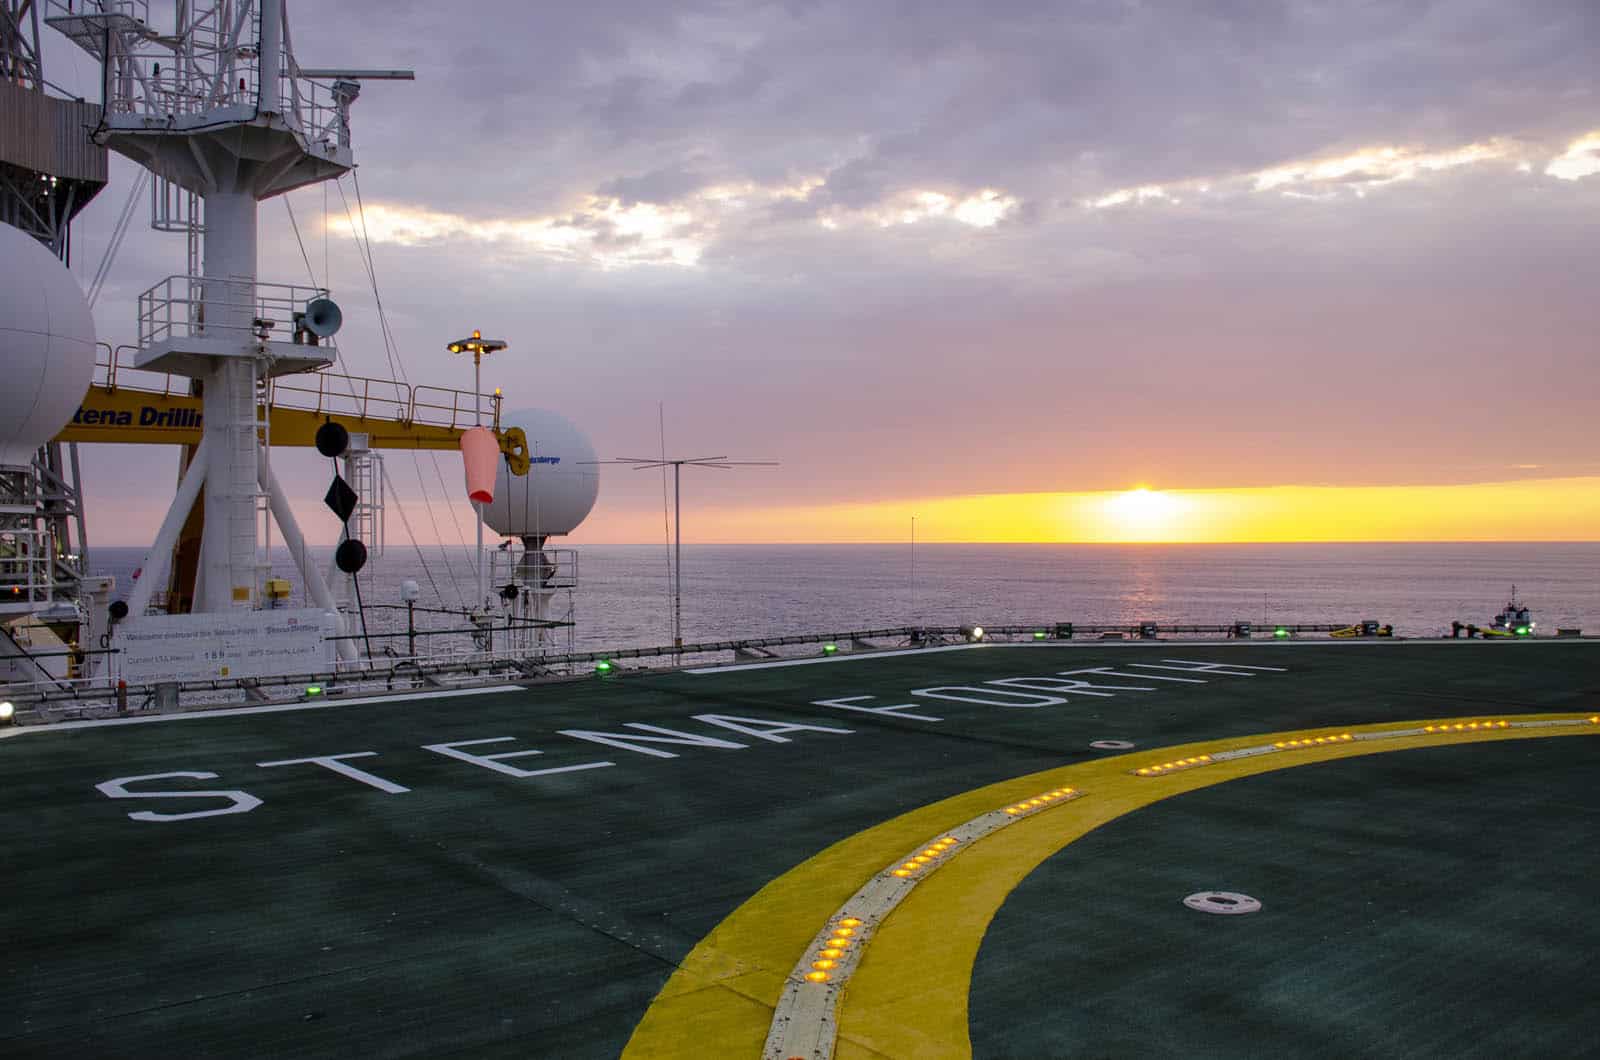 Helipad view and sunset at the distance